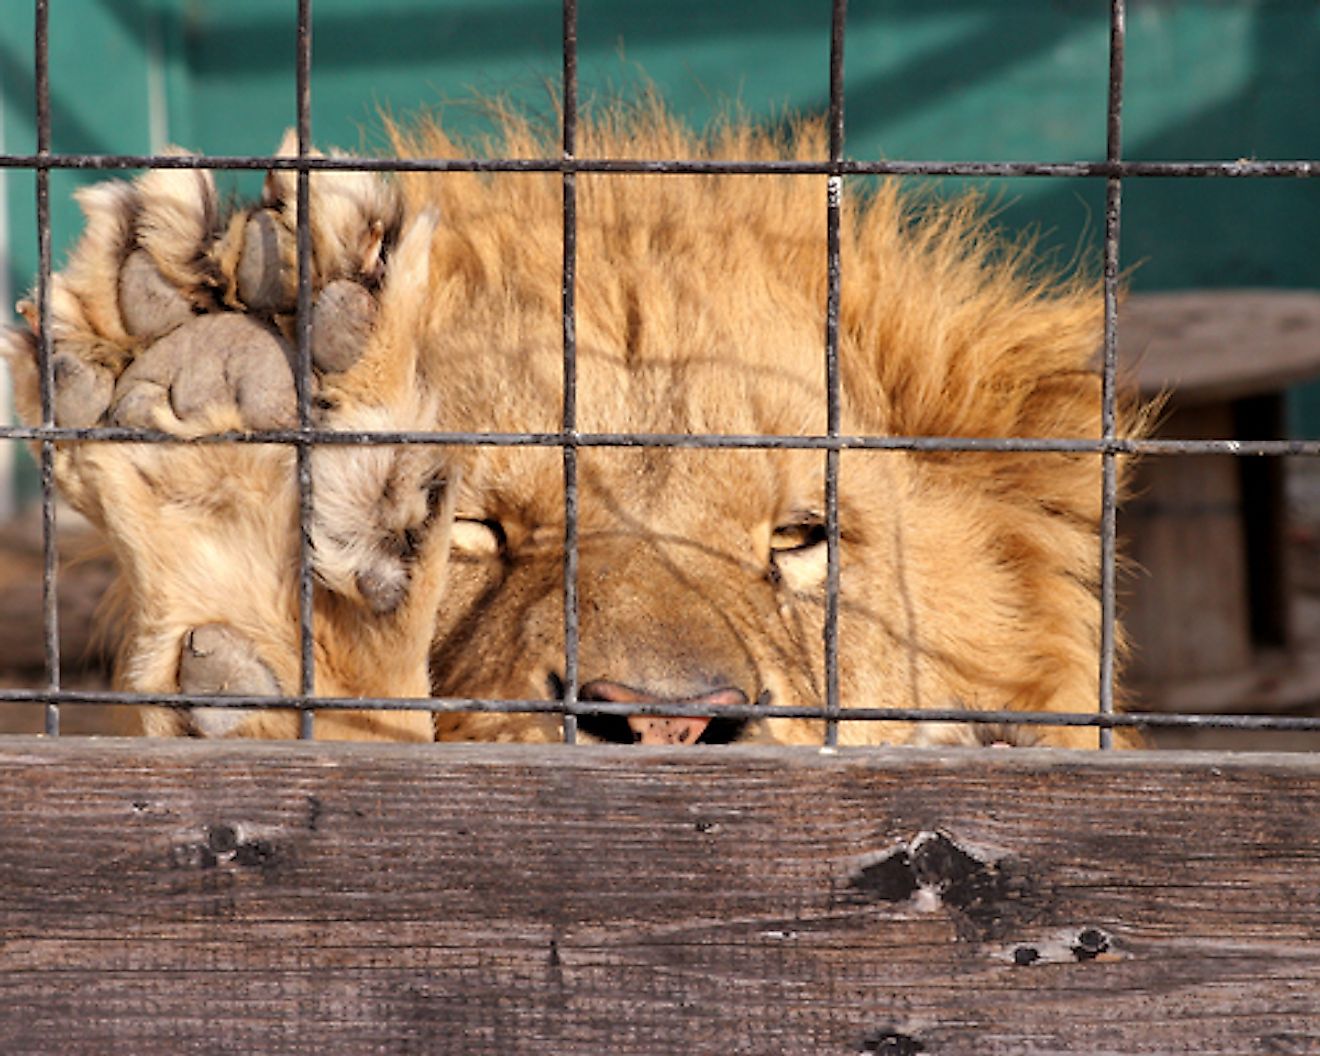 Canned hunting is a cruel sport subjecting animals to a life of misery. Image credit: Beckyeldredge.com